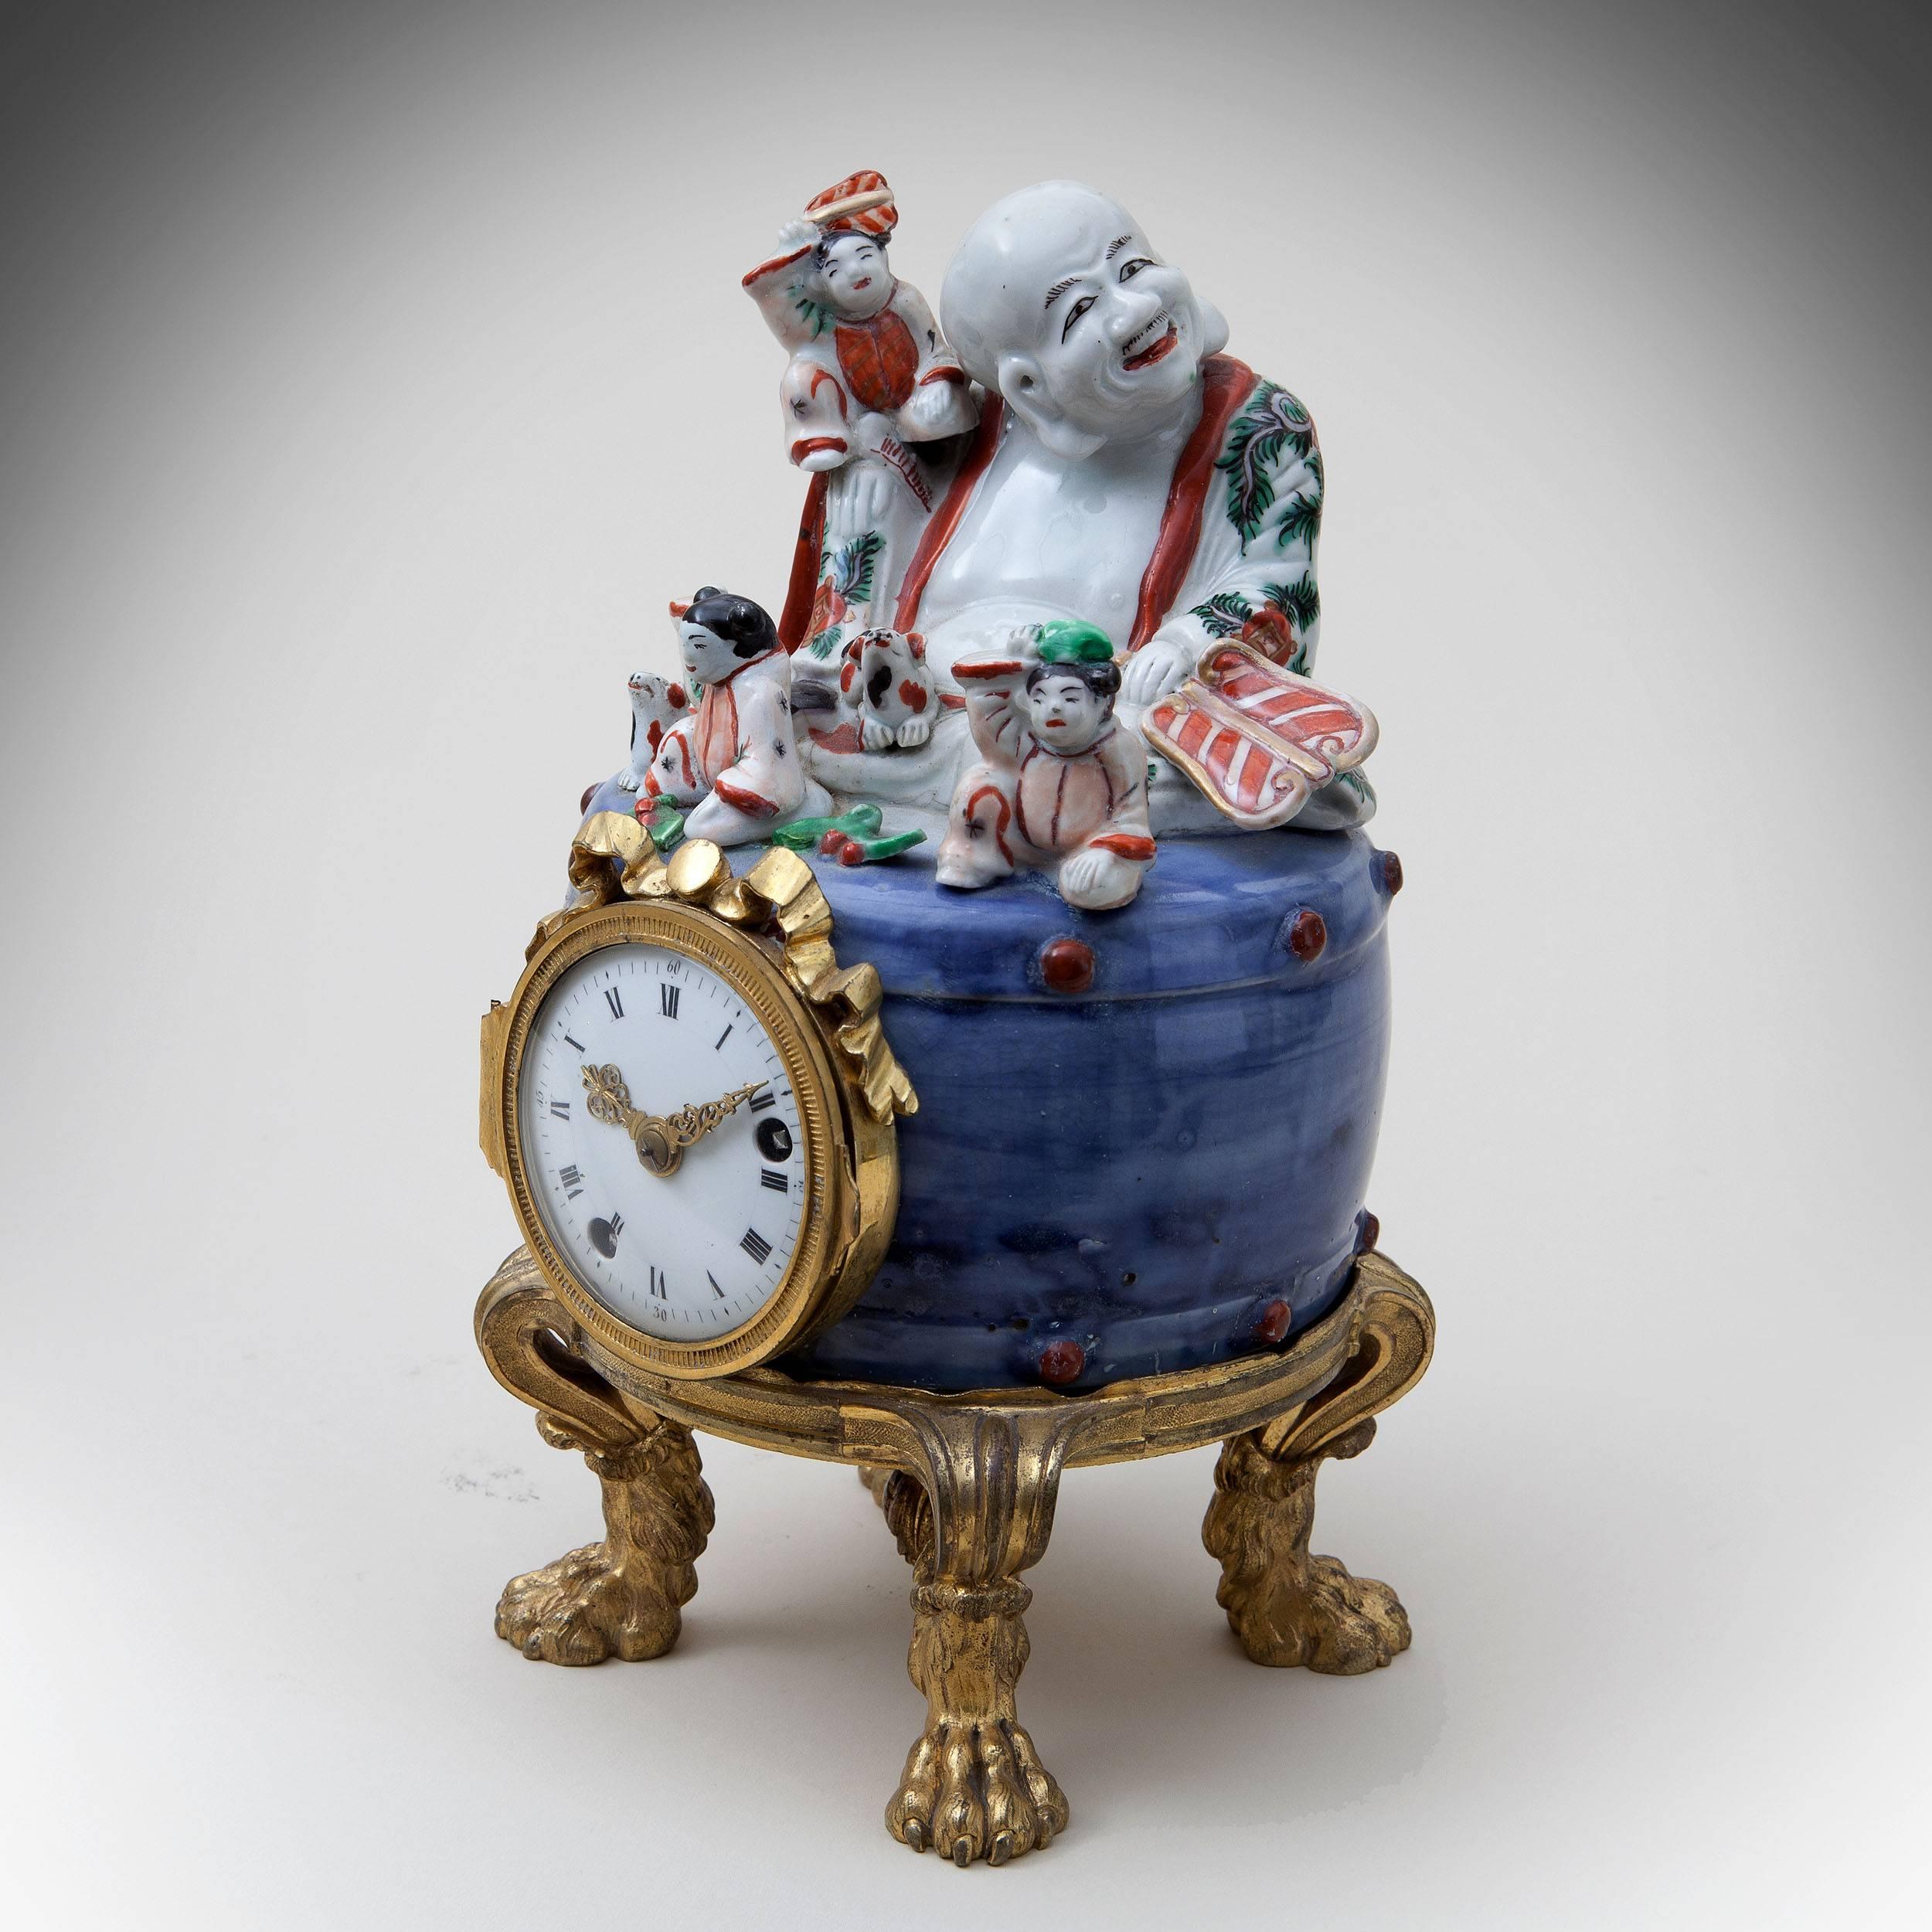 A fine French mantel clock by Louis Montjoye, Paris. The richly chased and gilt ormolu mounts as hairy paw feet supporting a Arita figure of a Hotei seated on a drum with puppies and children, decorated in polychrome enamels. 

Measures: Height